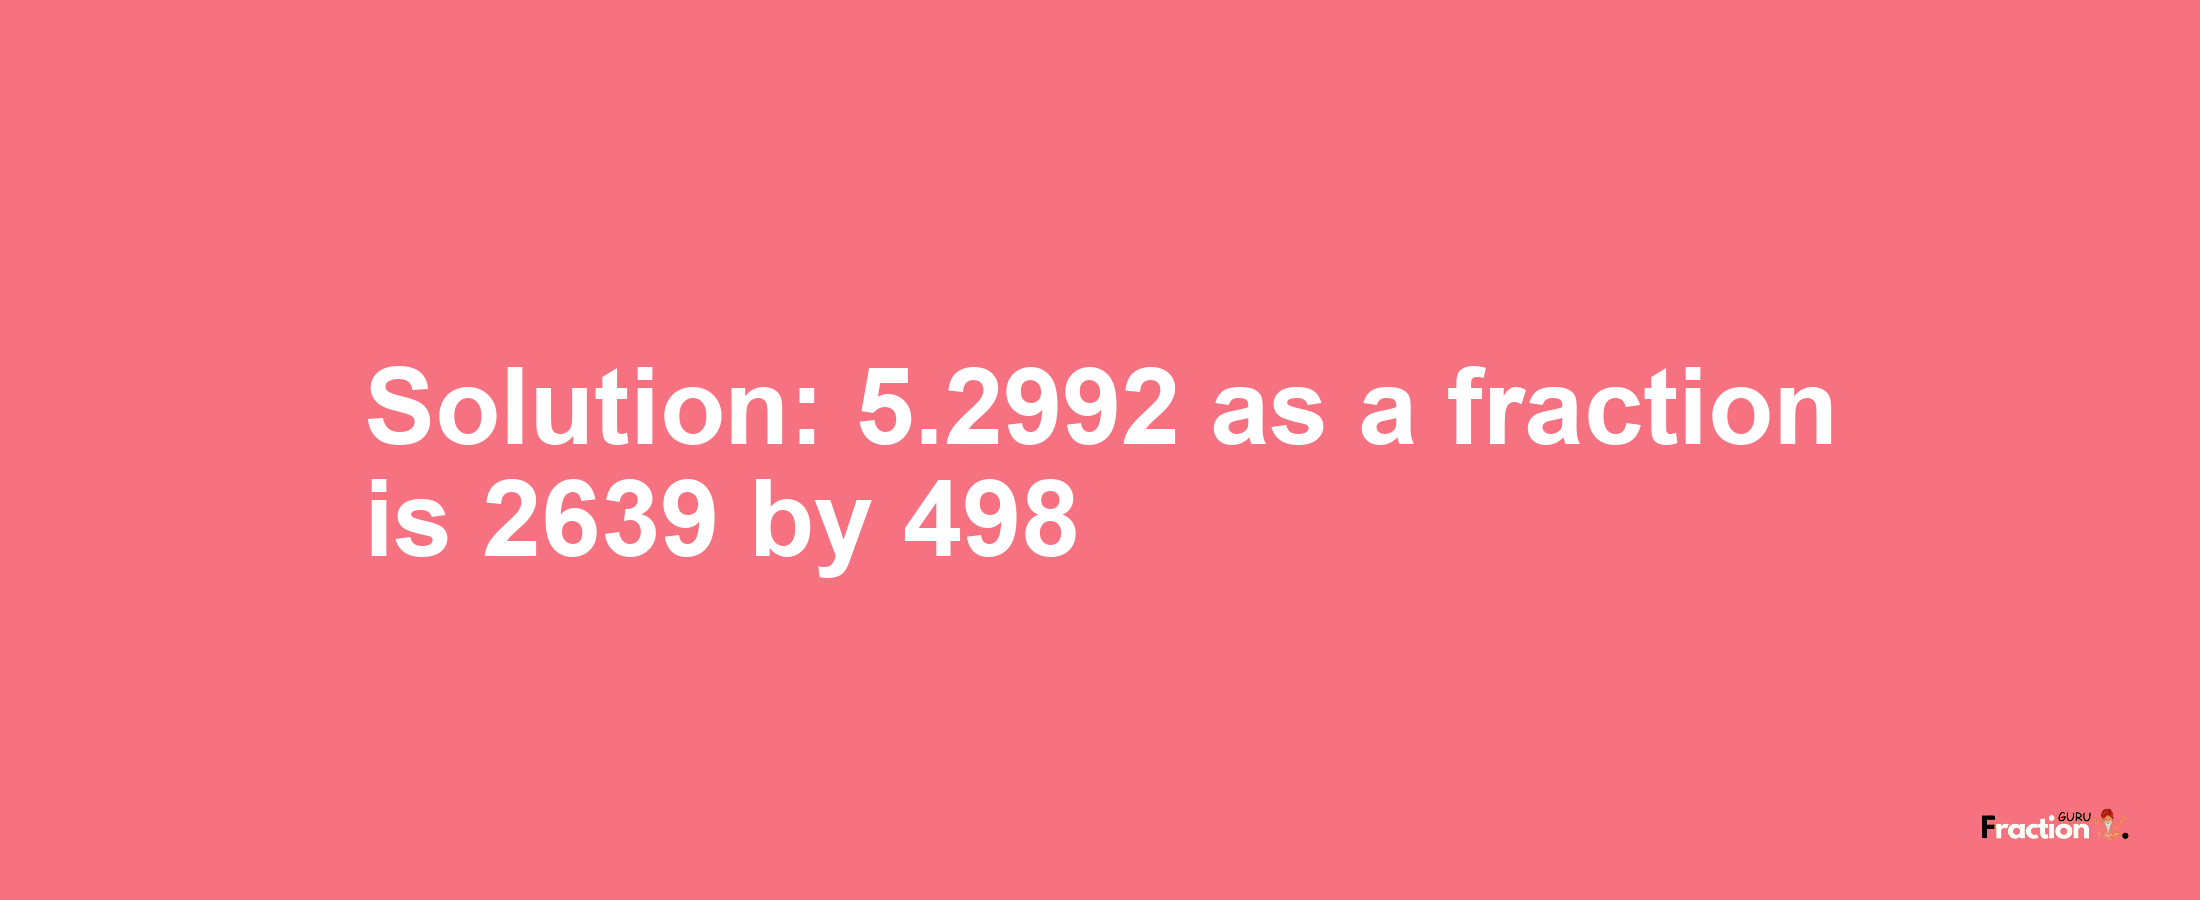 Solution:5.2992 as a fraction is 2639/498